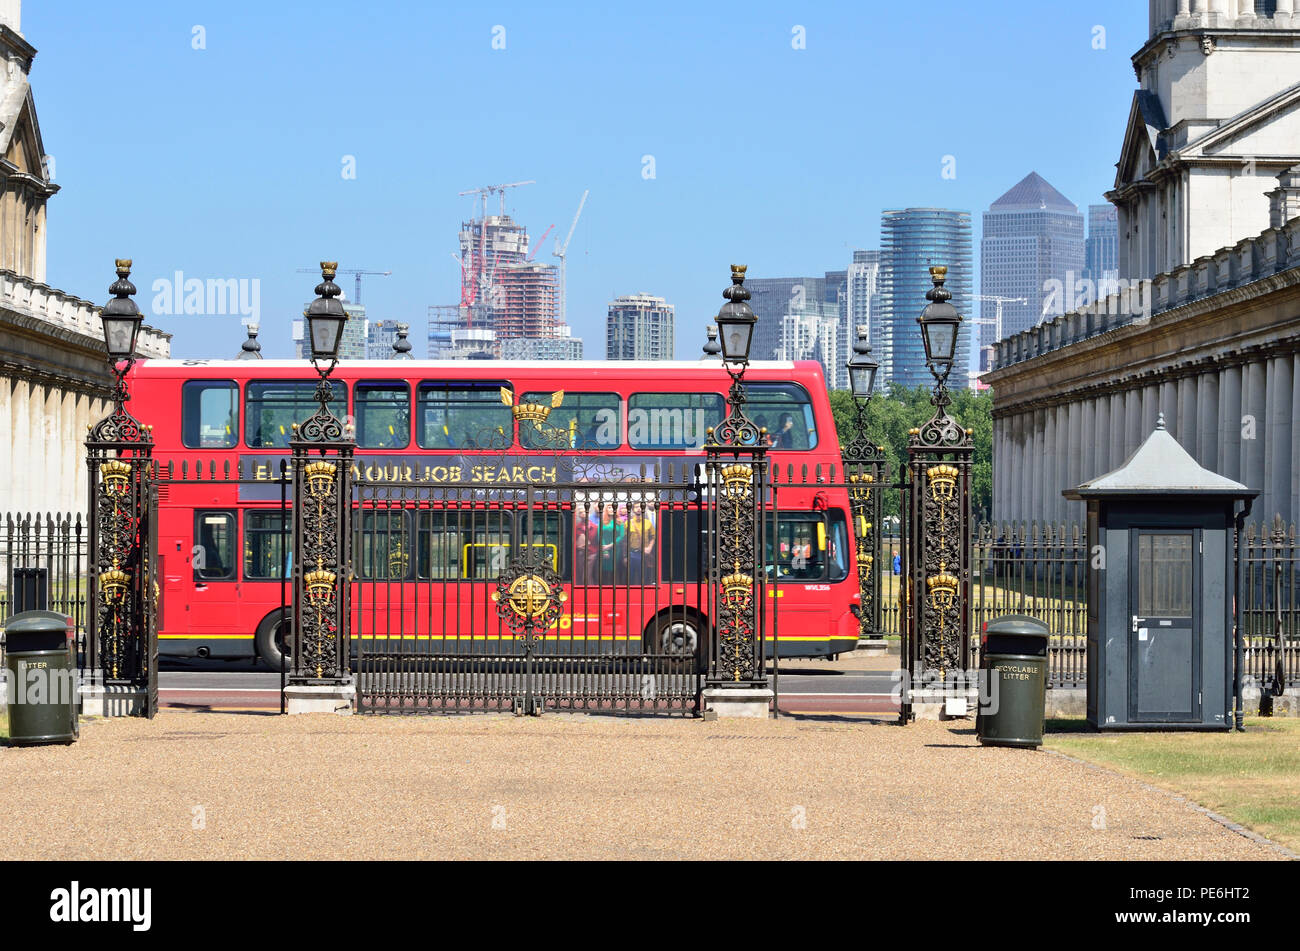 Red Double Decker bus passing the gate to Queen's House, Greenwich, England 180627 73623 Stock Photo